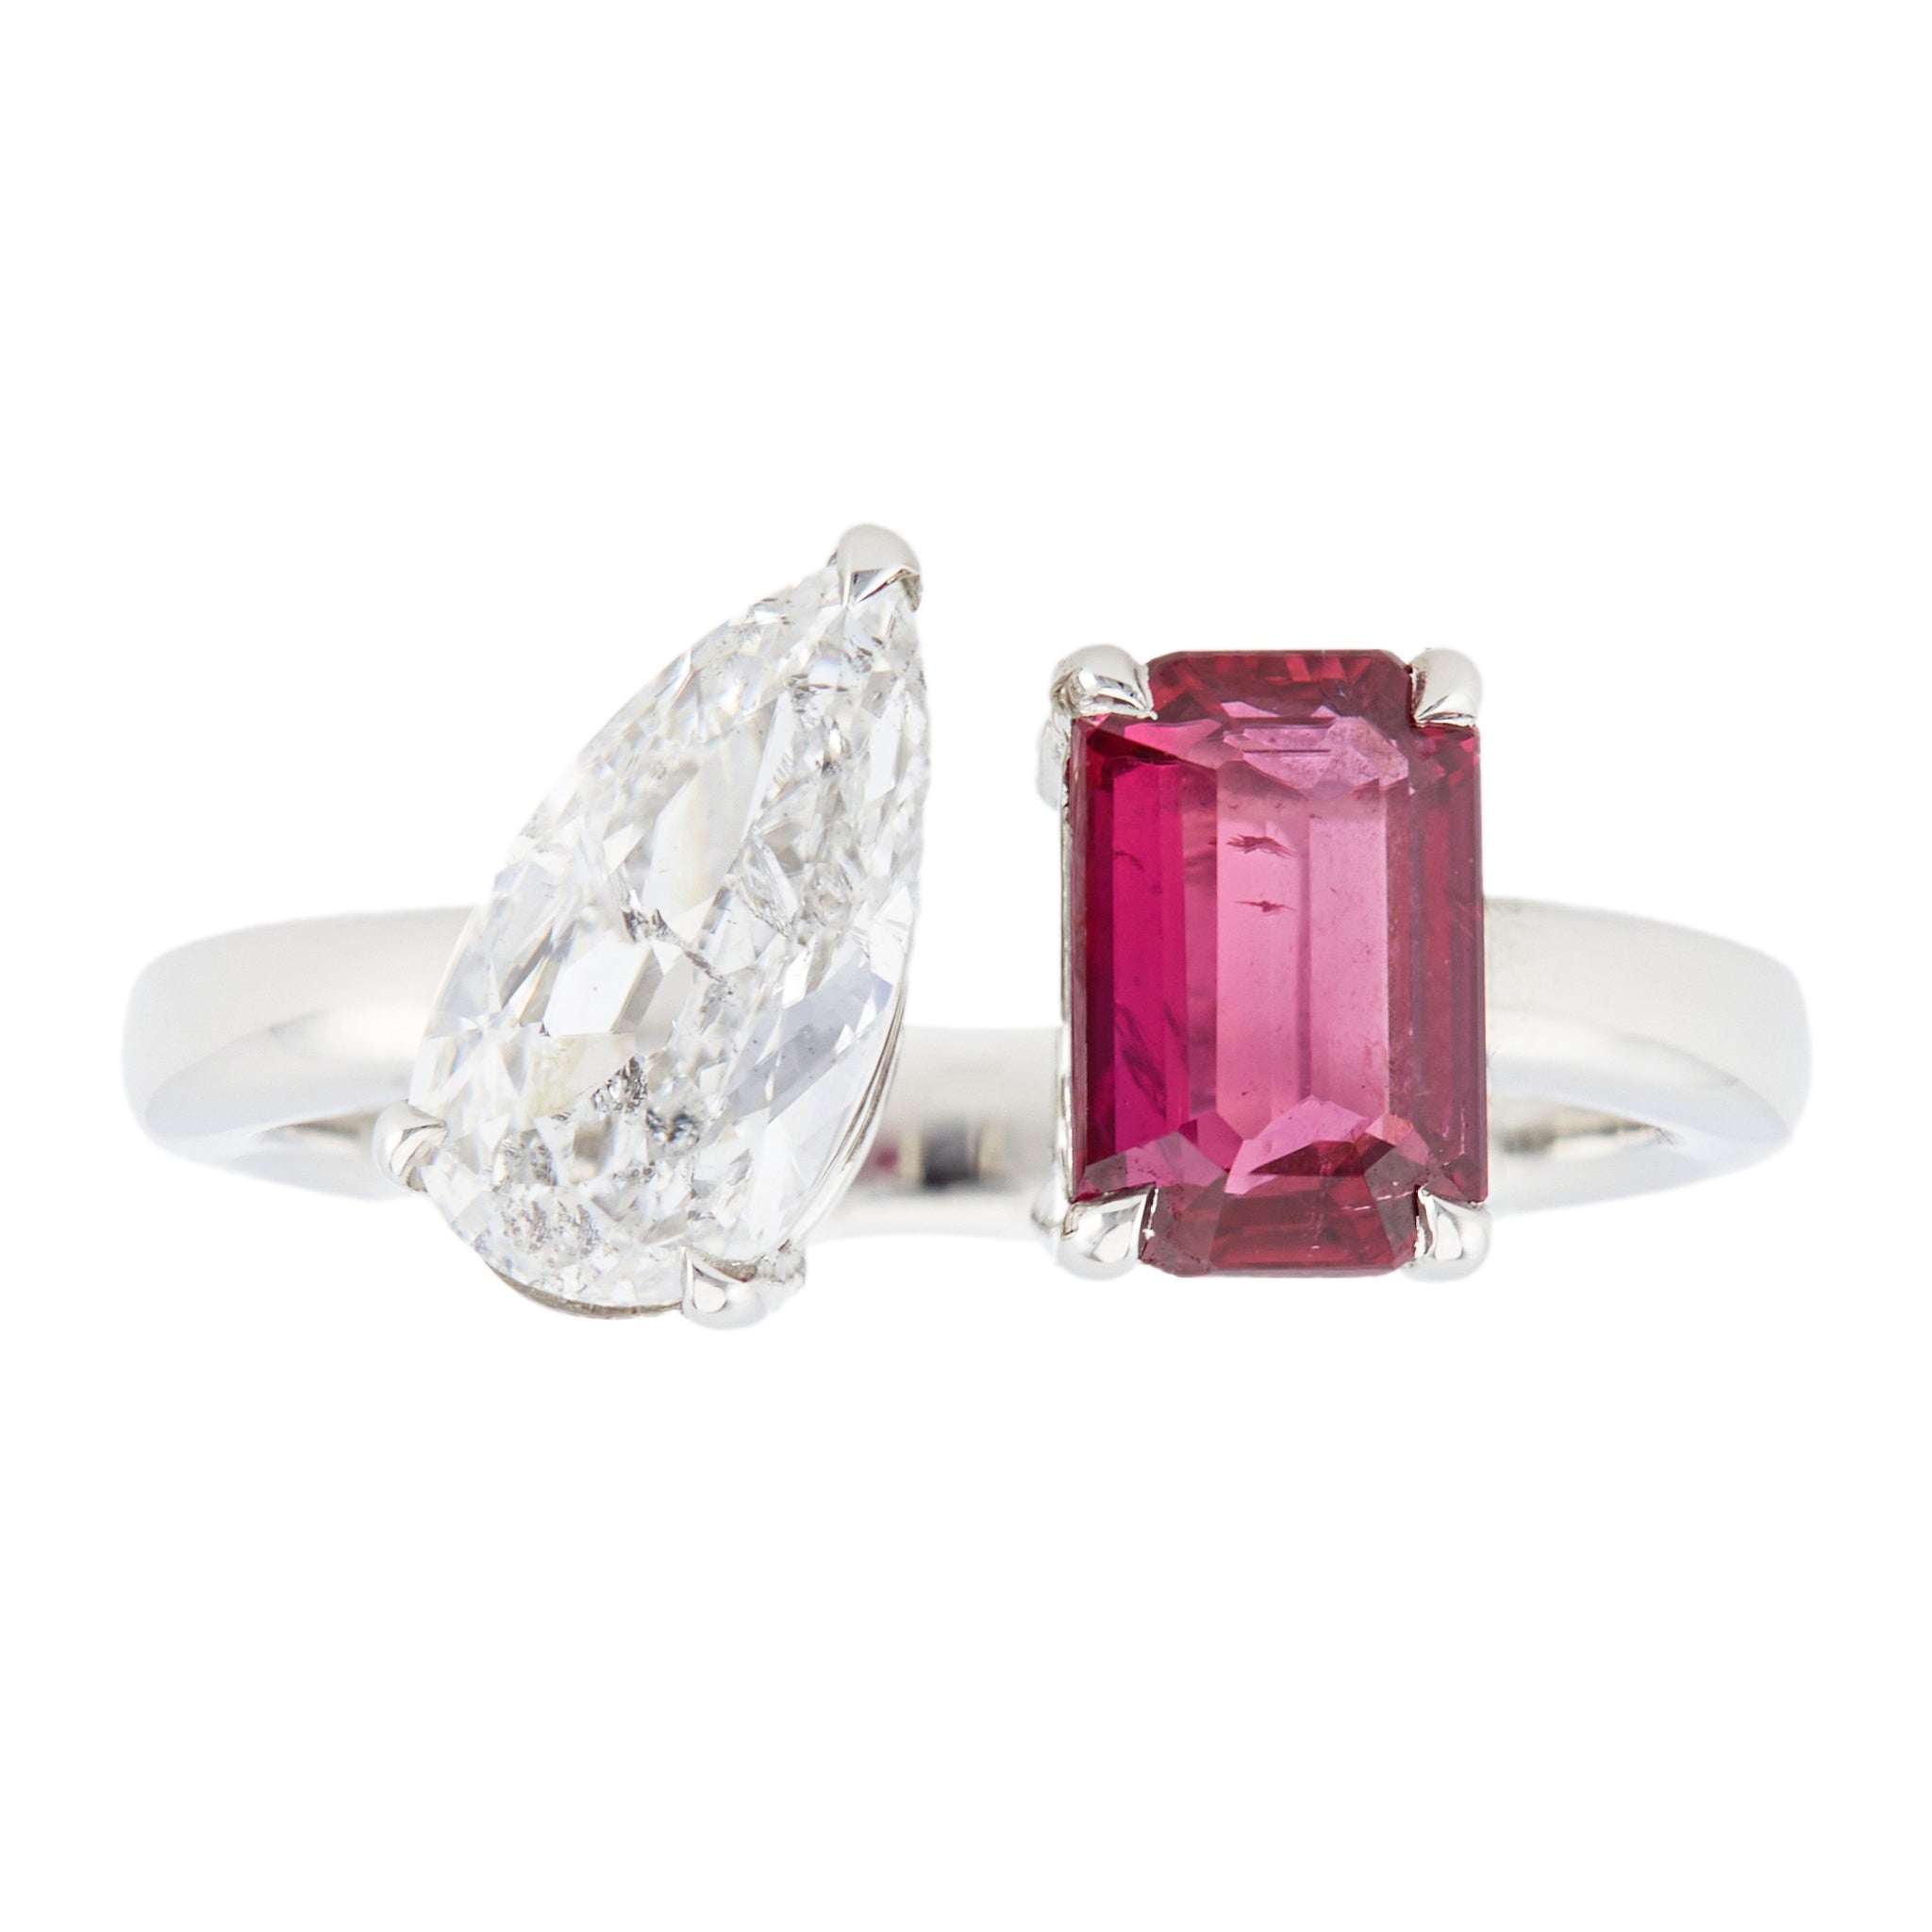 GIA 1.15 Carat Pear Cut Diamond and Ruby Platinum Toi et Moi Ring Rings Jack Weir & Sons   